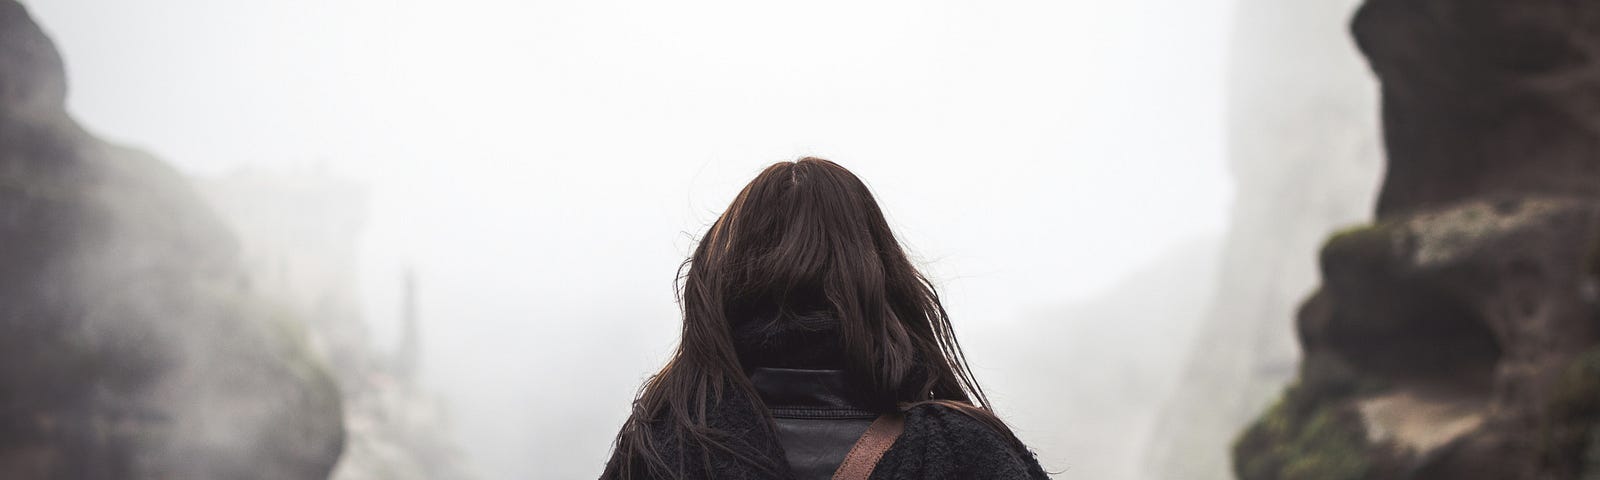 Woman with dark brown, shoulder-length hair standing between two rock walls with a leather satchel on her back heading into the fog.